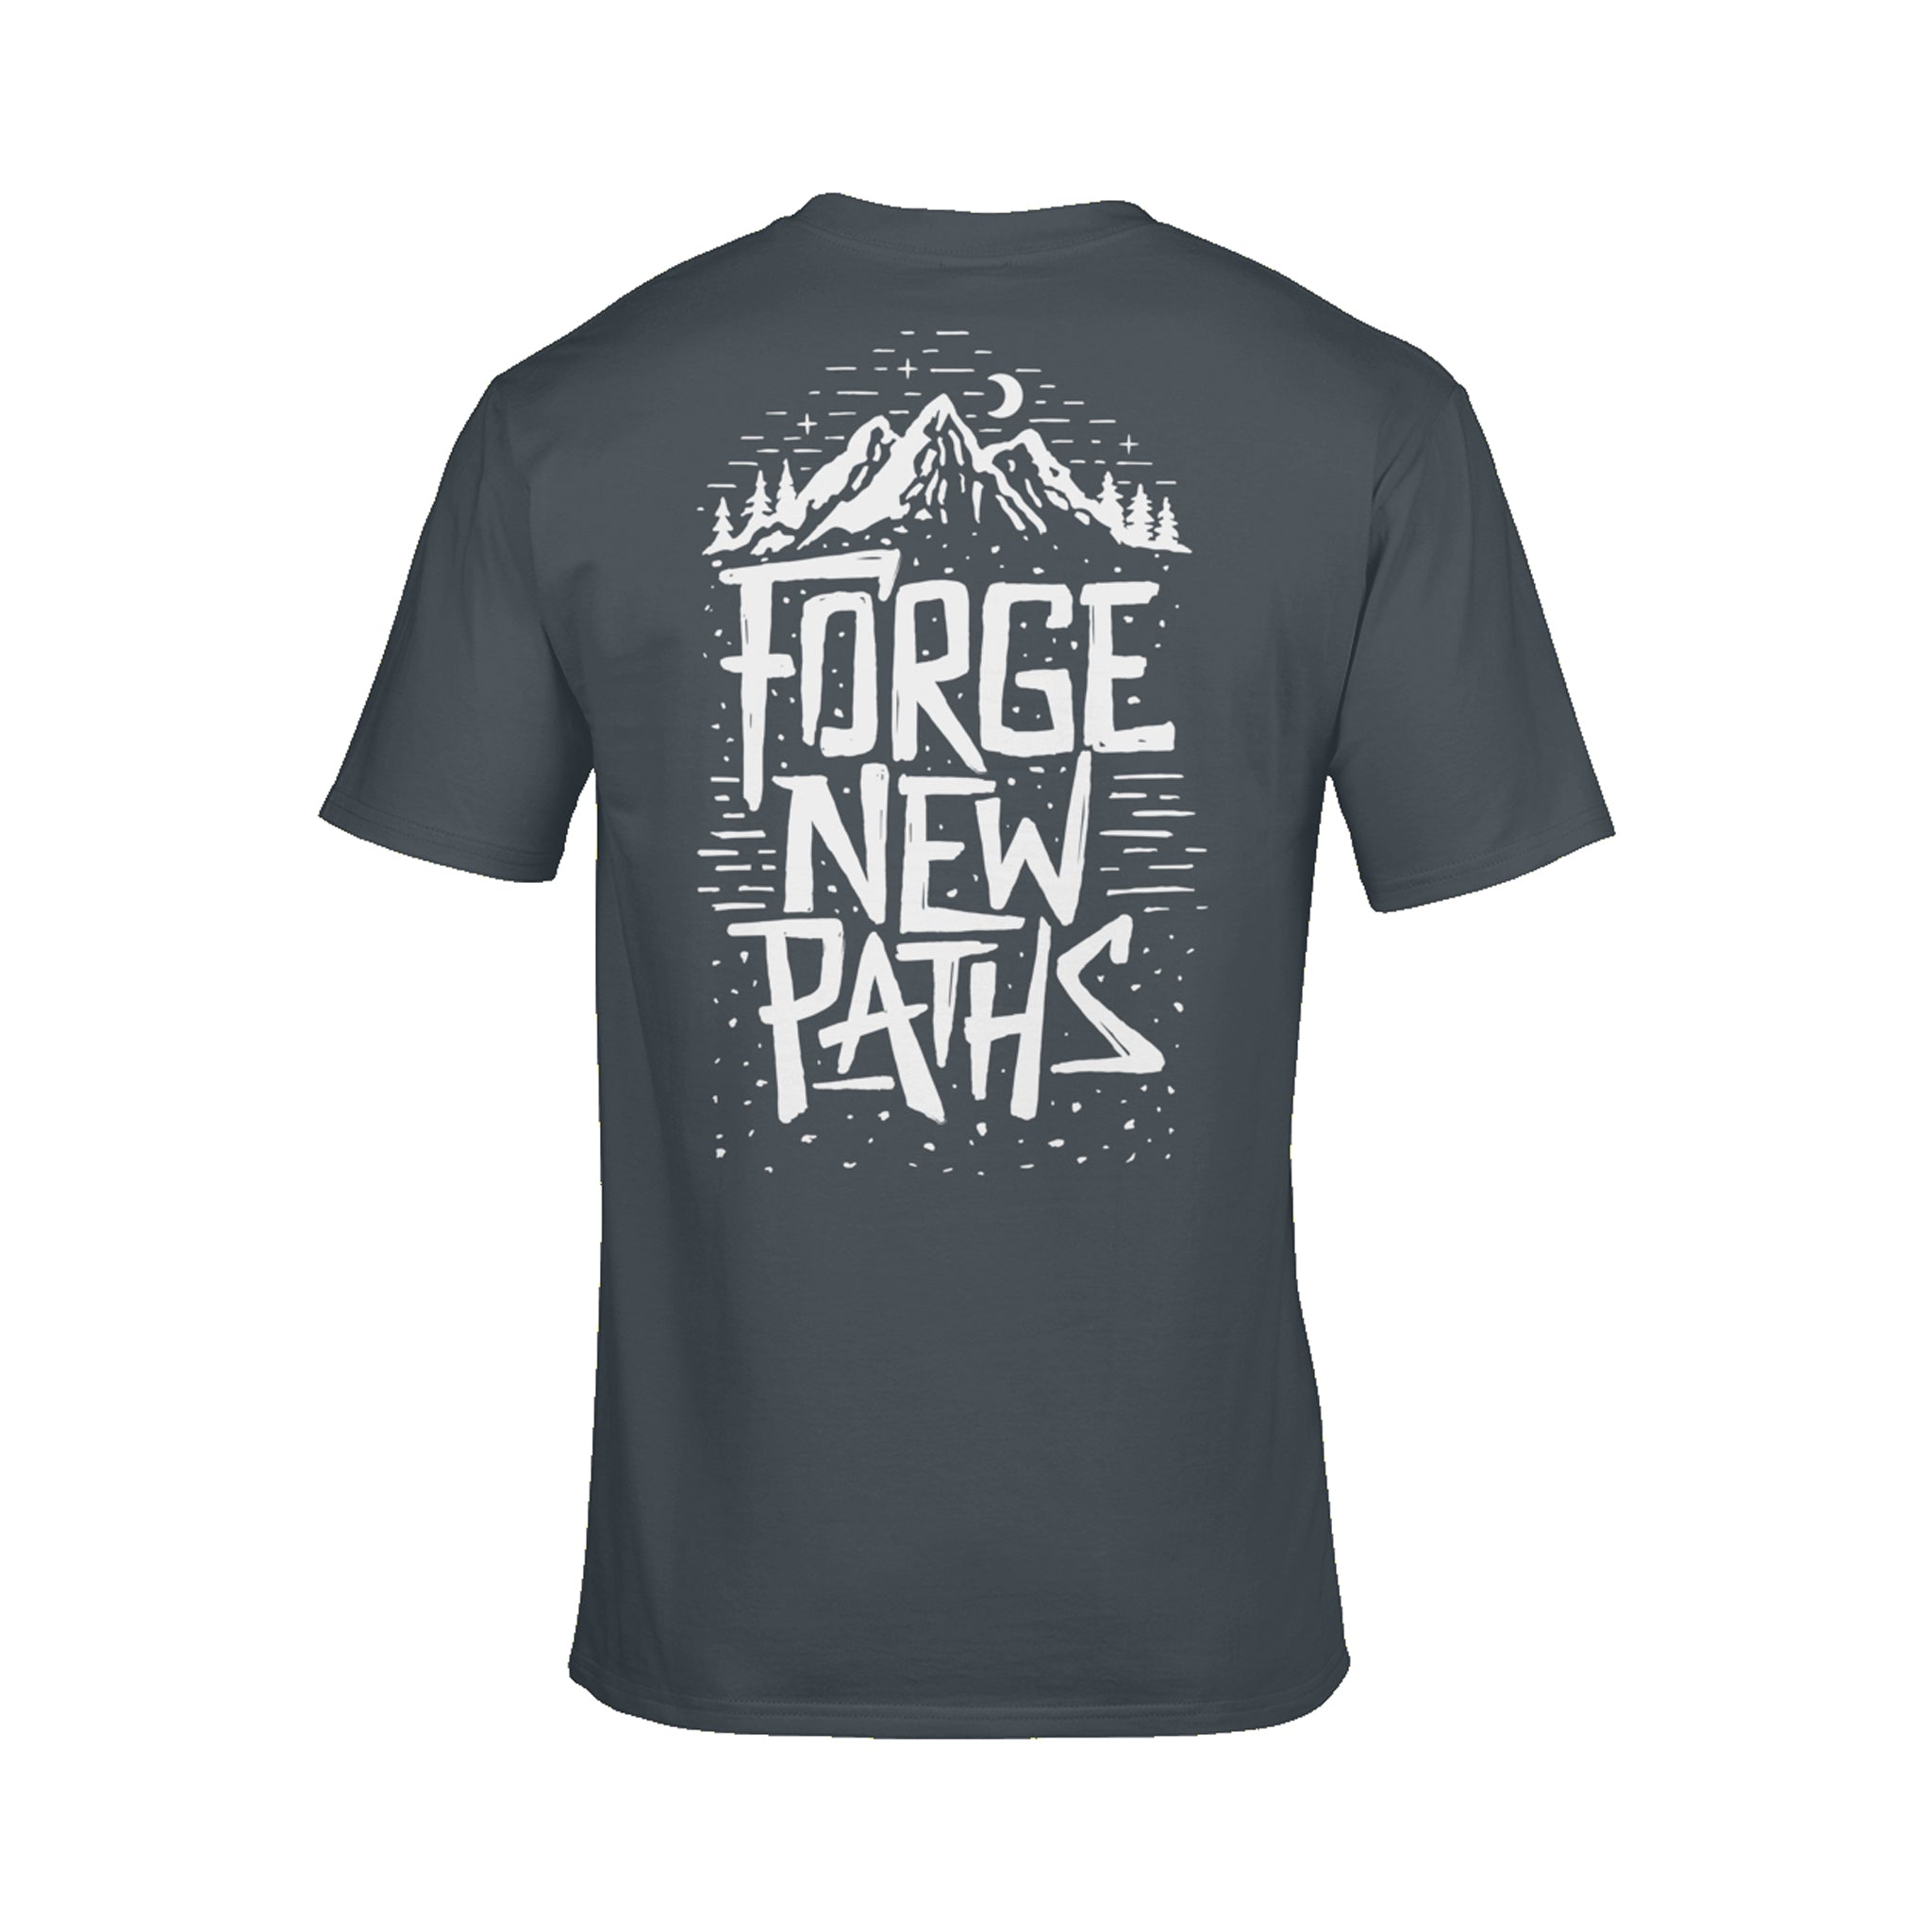 'Forge New Paths' Mens T-Shirt